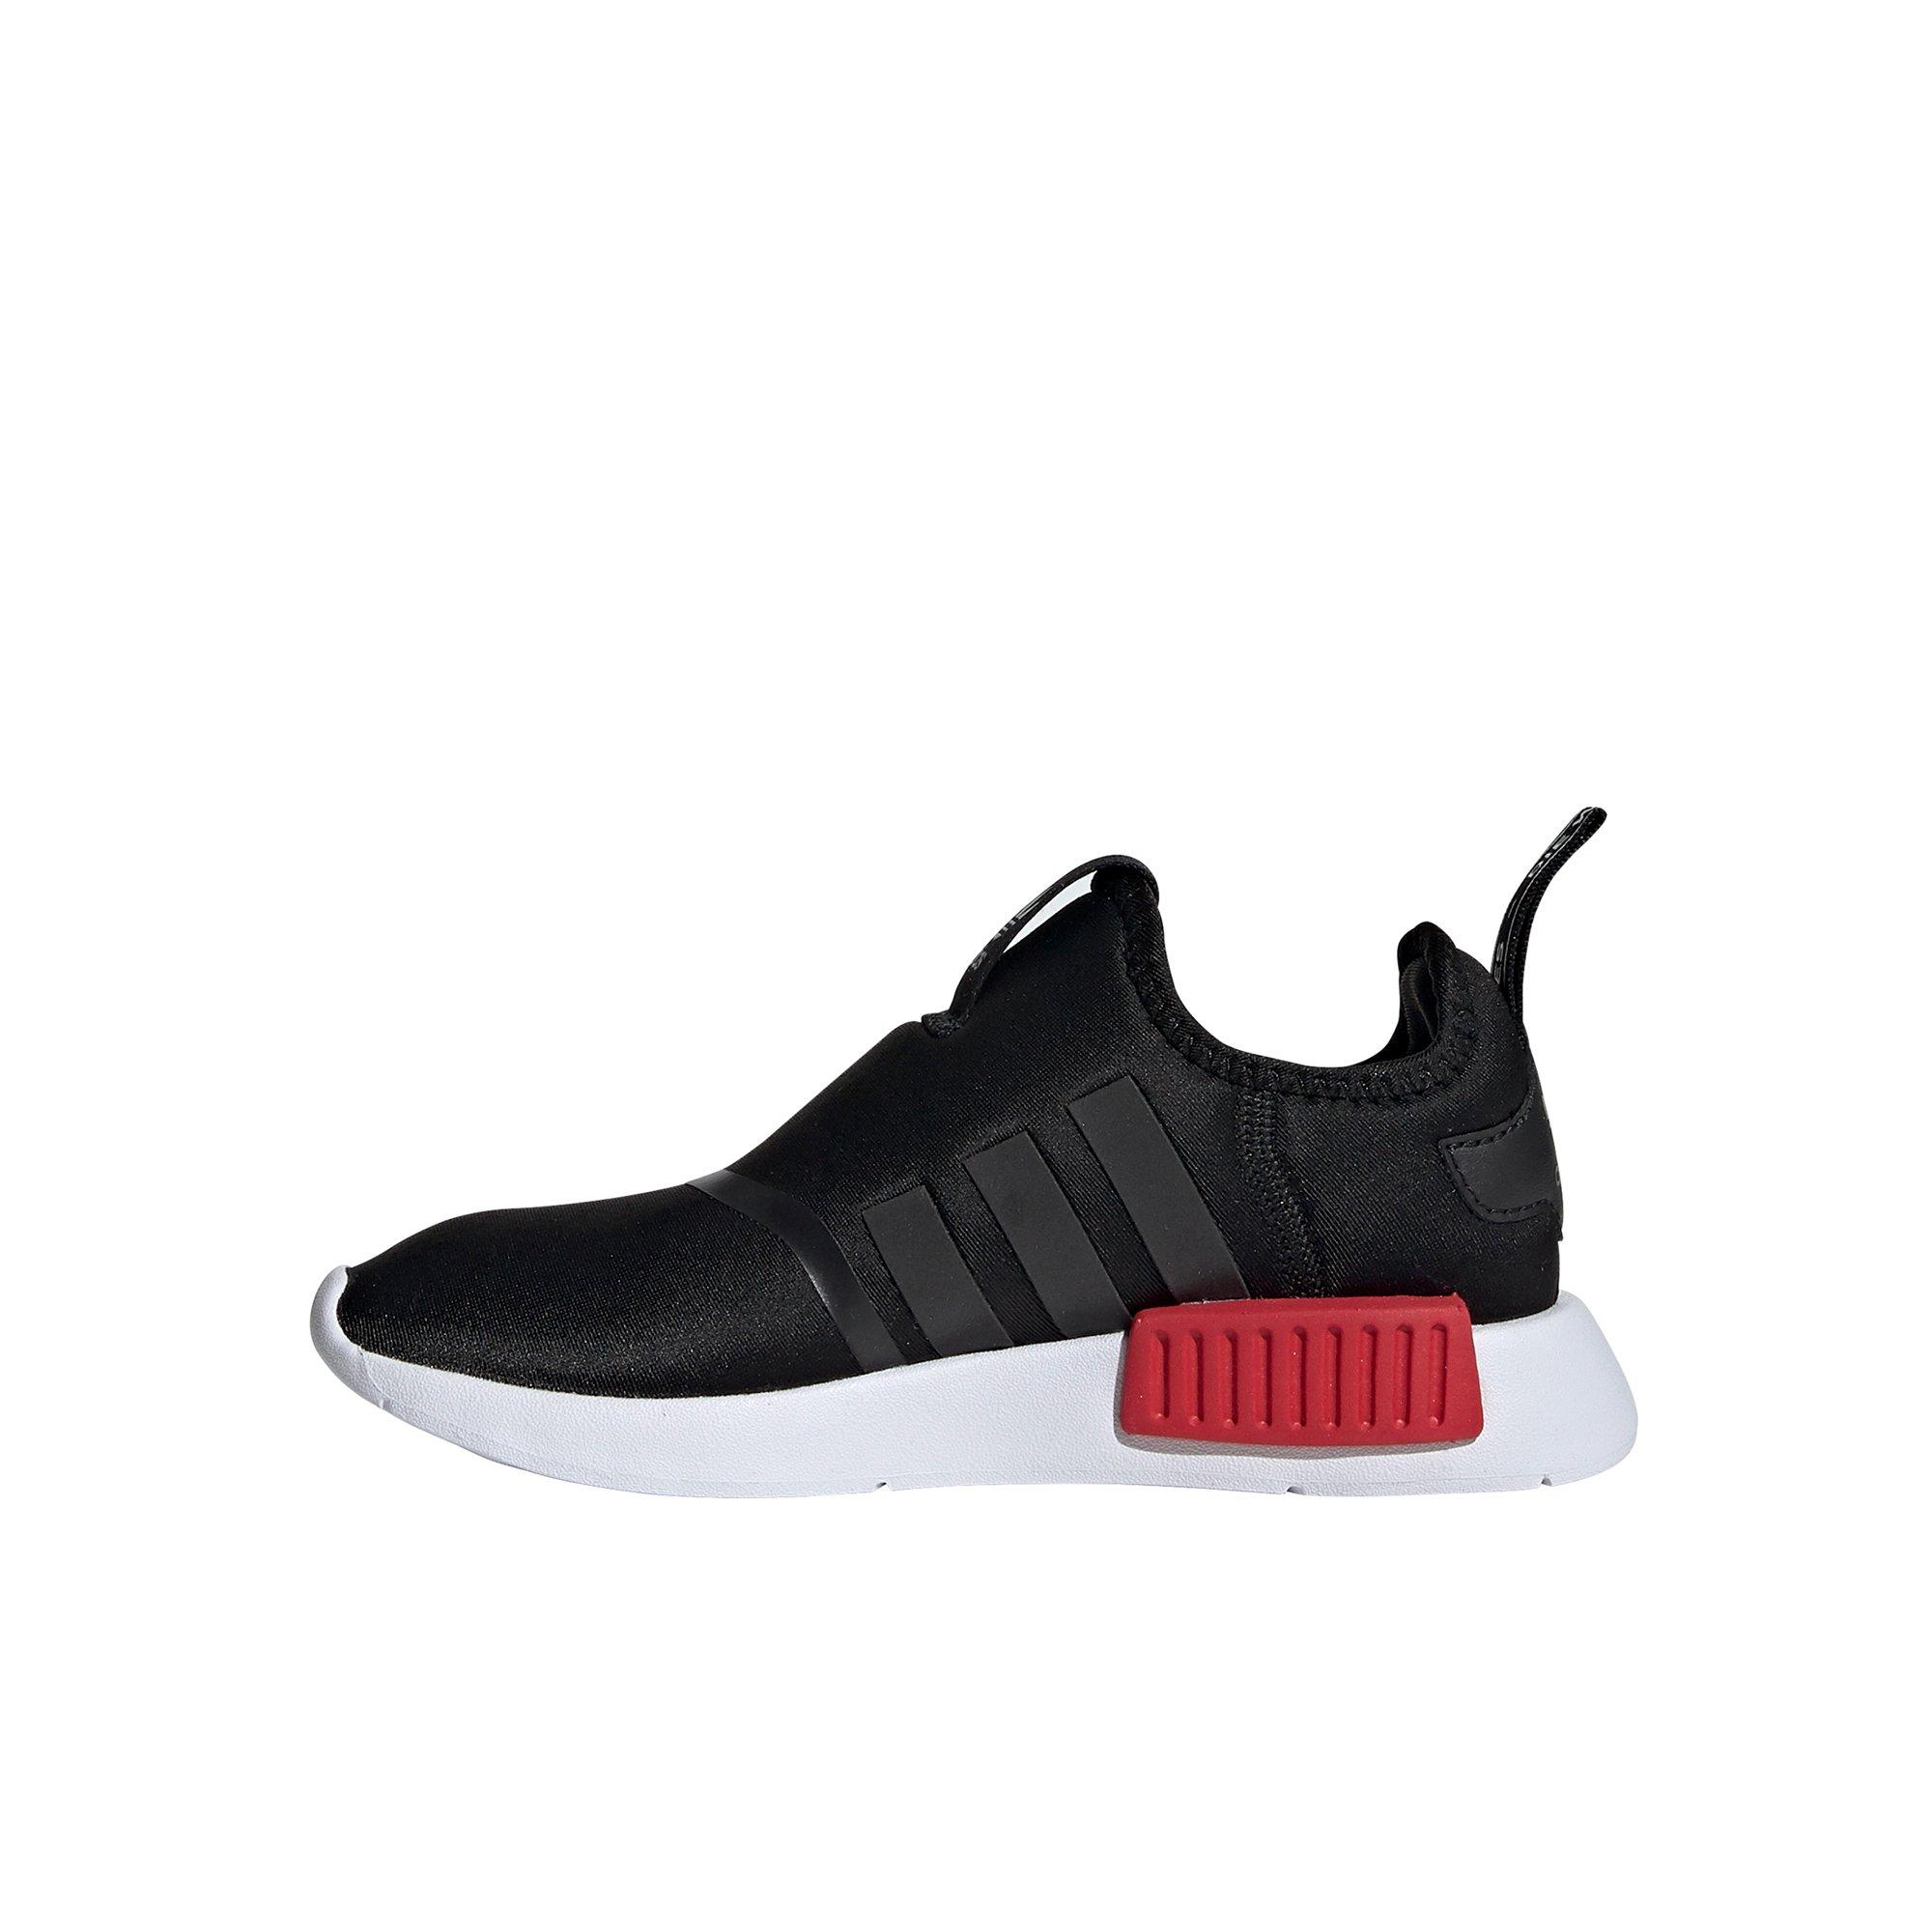 nmds red and black